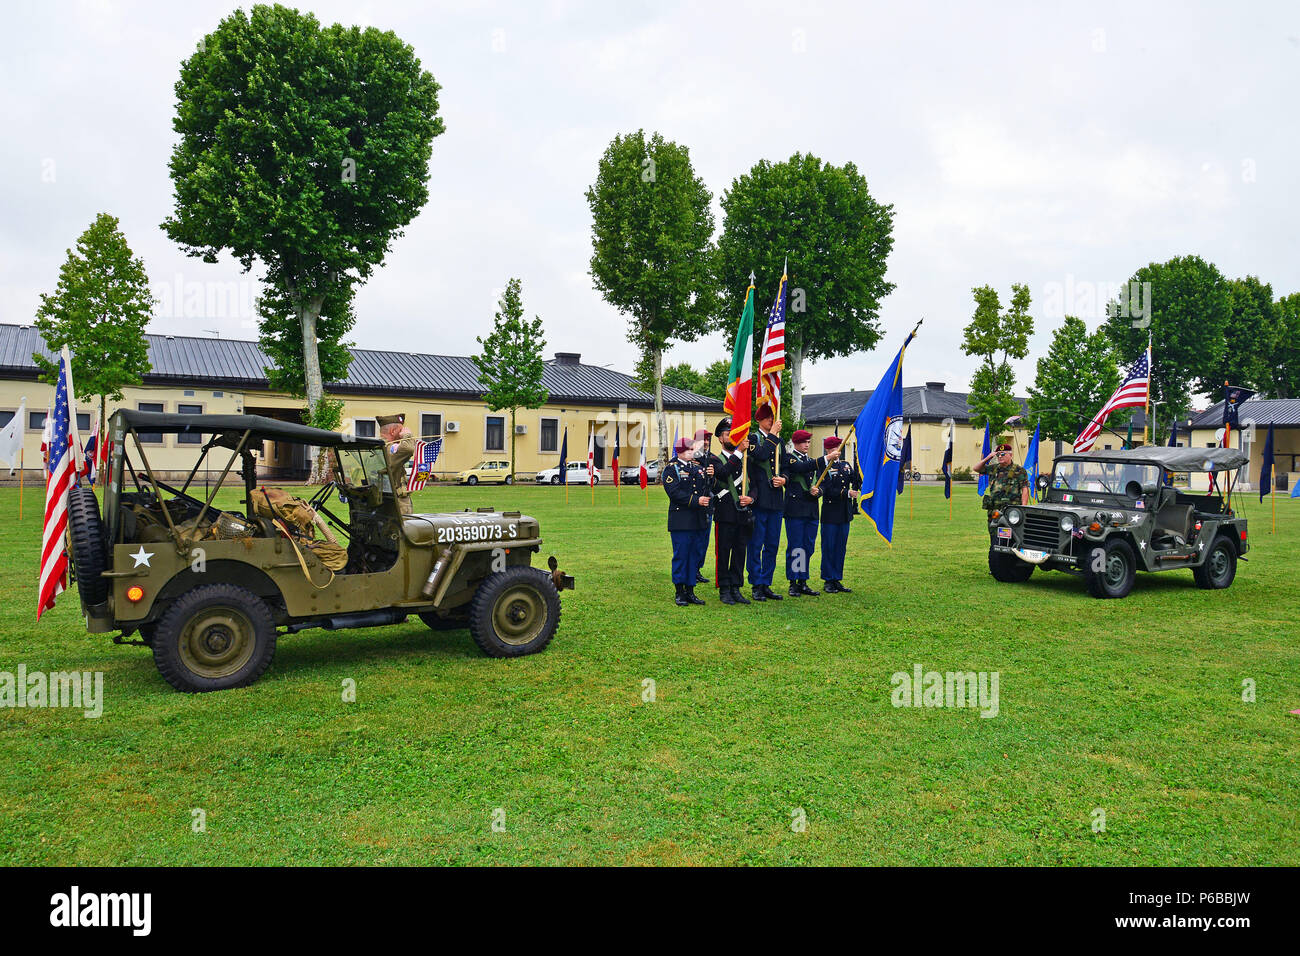 U. S. Army Soldiers, Italian Carabinieri and historical characters with military vehicles dating back to World War II, salute during the playing of the U.S. and Italian national anthems during a retirement ceremony at Caserma C. Ederle Vicenza, Italy, June 22, 2018. (U.S. Army photo by Paolo Bovo). Stock Photo